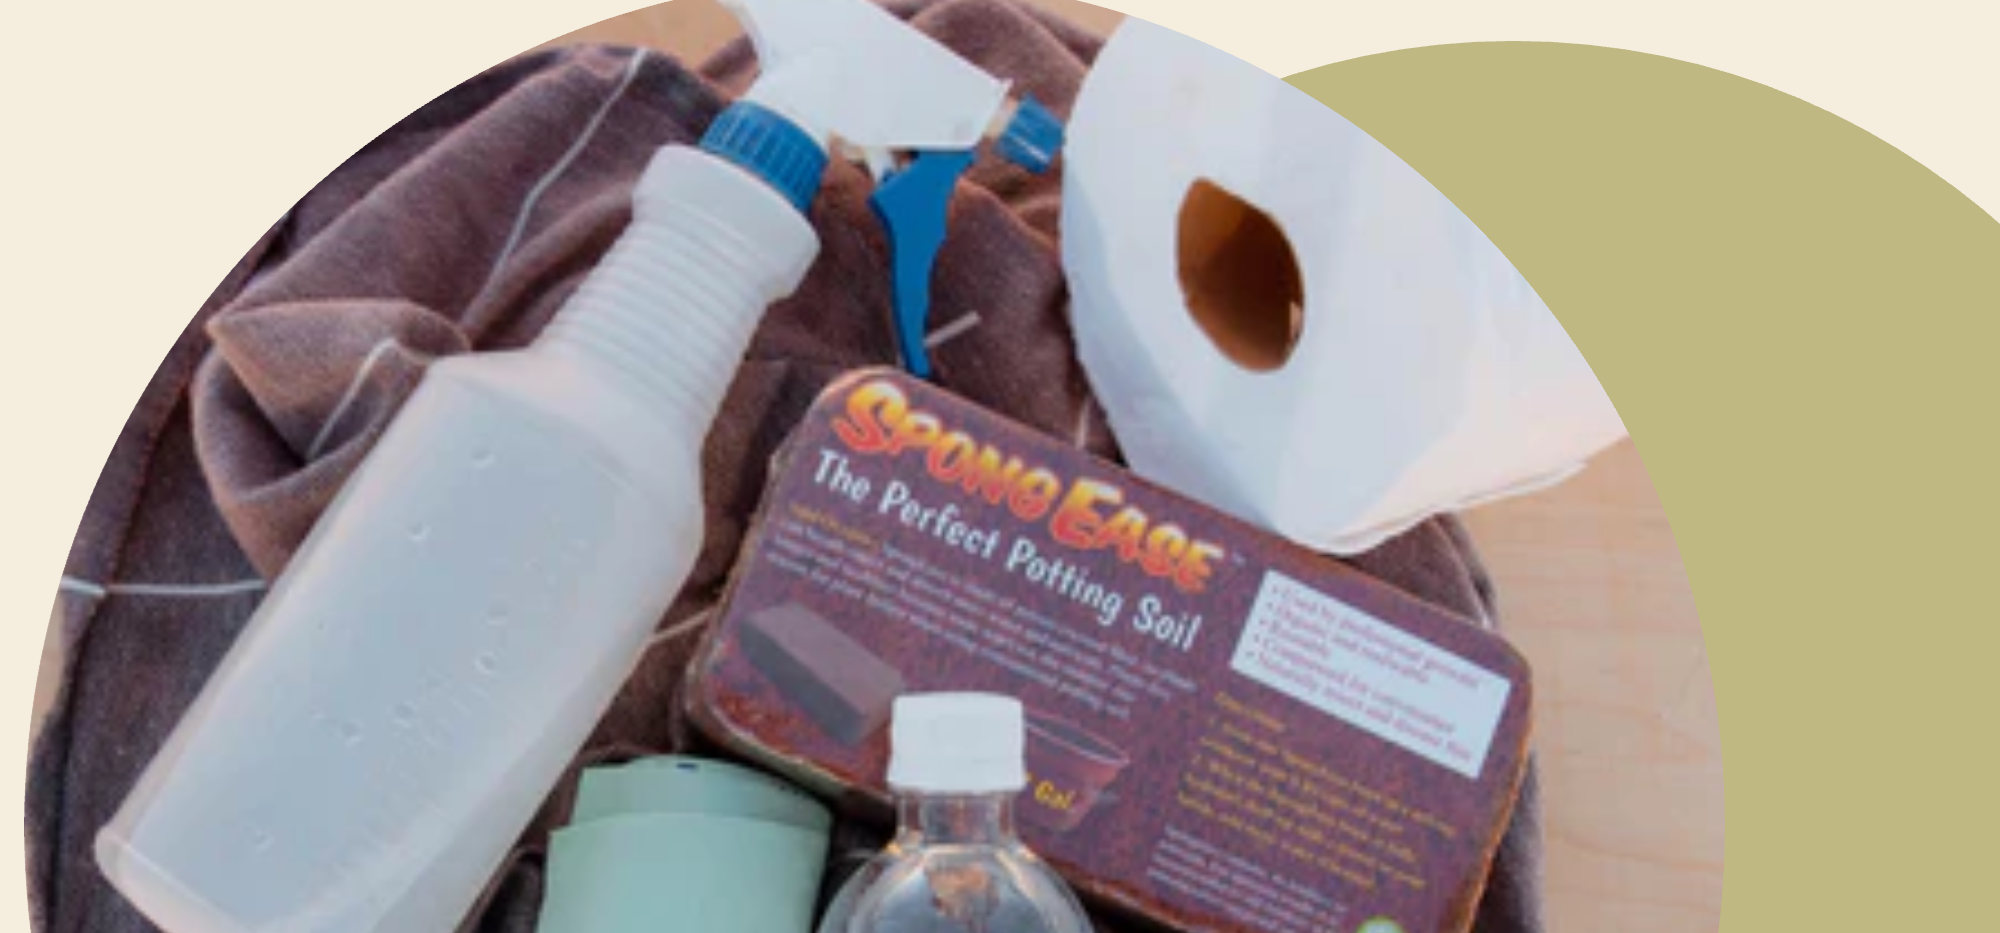 How to Care for your Composting Toilet – Maintenance, Cleaning, and Emptying